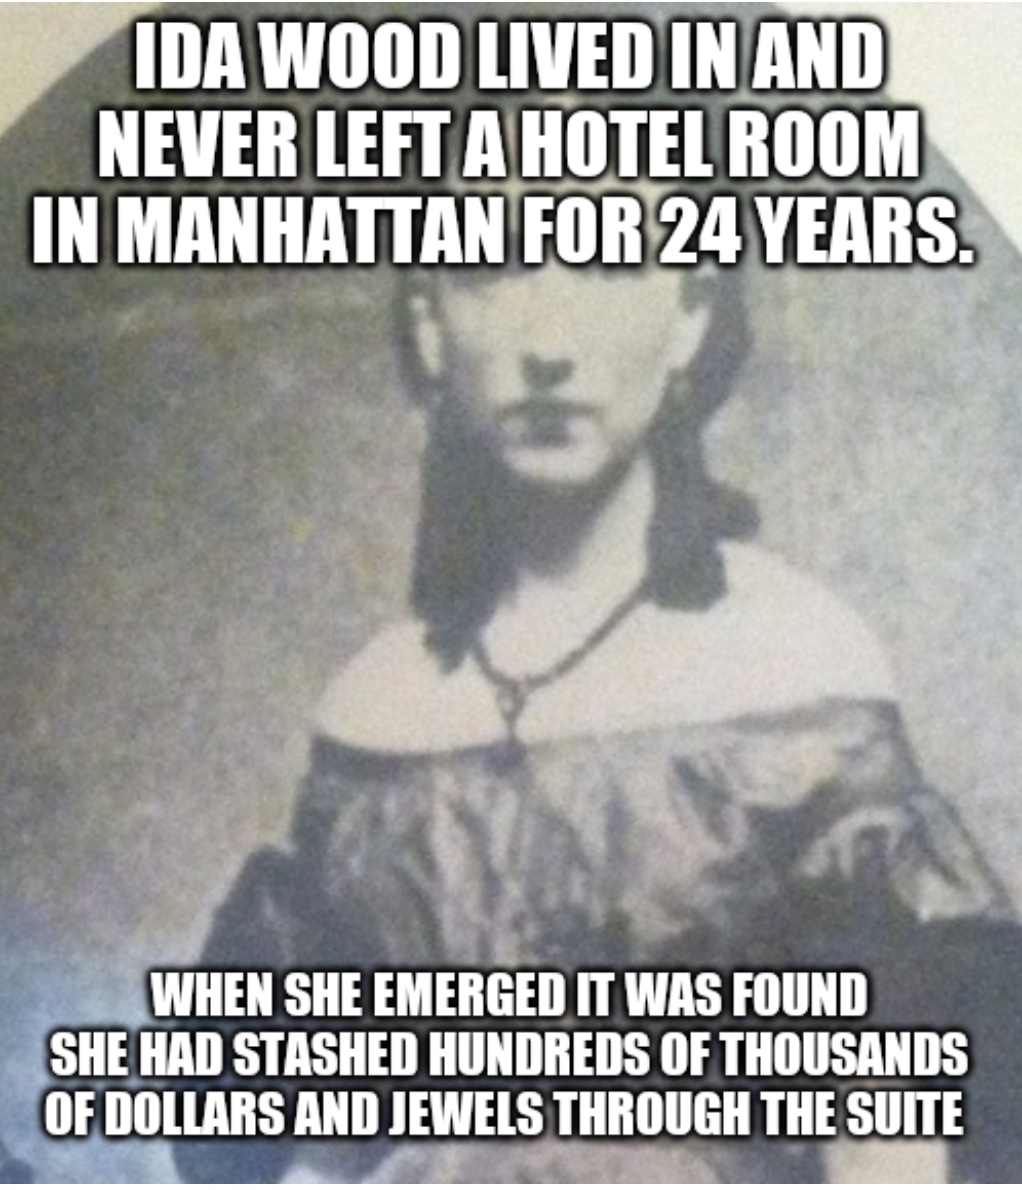 willy wonka meme - Ida Wood Lived In And Never Left A Hotel Room In Manhattan For 24 Years. When She Emerged It Was Found She Had Stashed Hundreds Of Thousands Of Dollars And Jewels Through The Suite